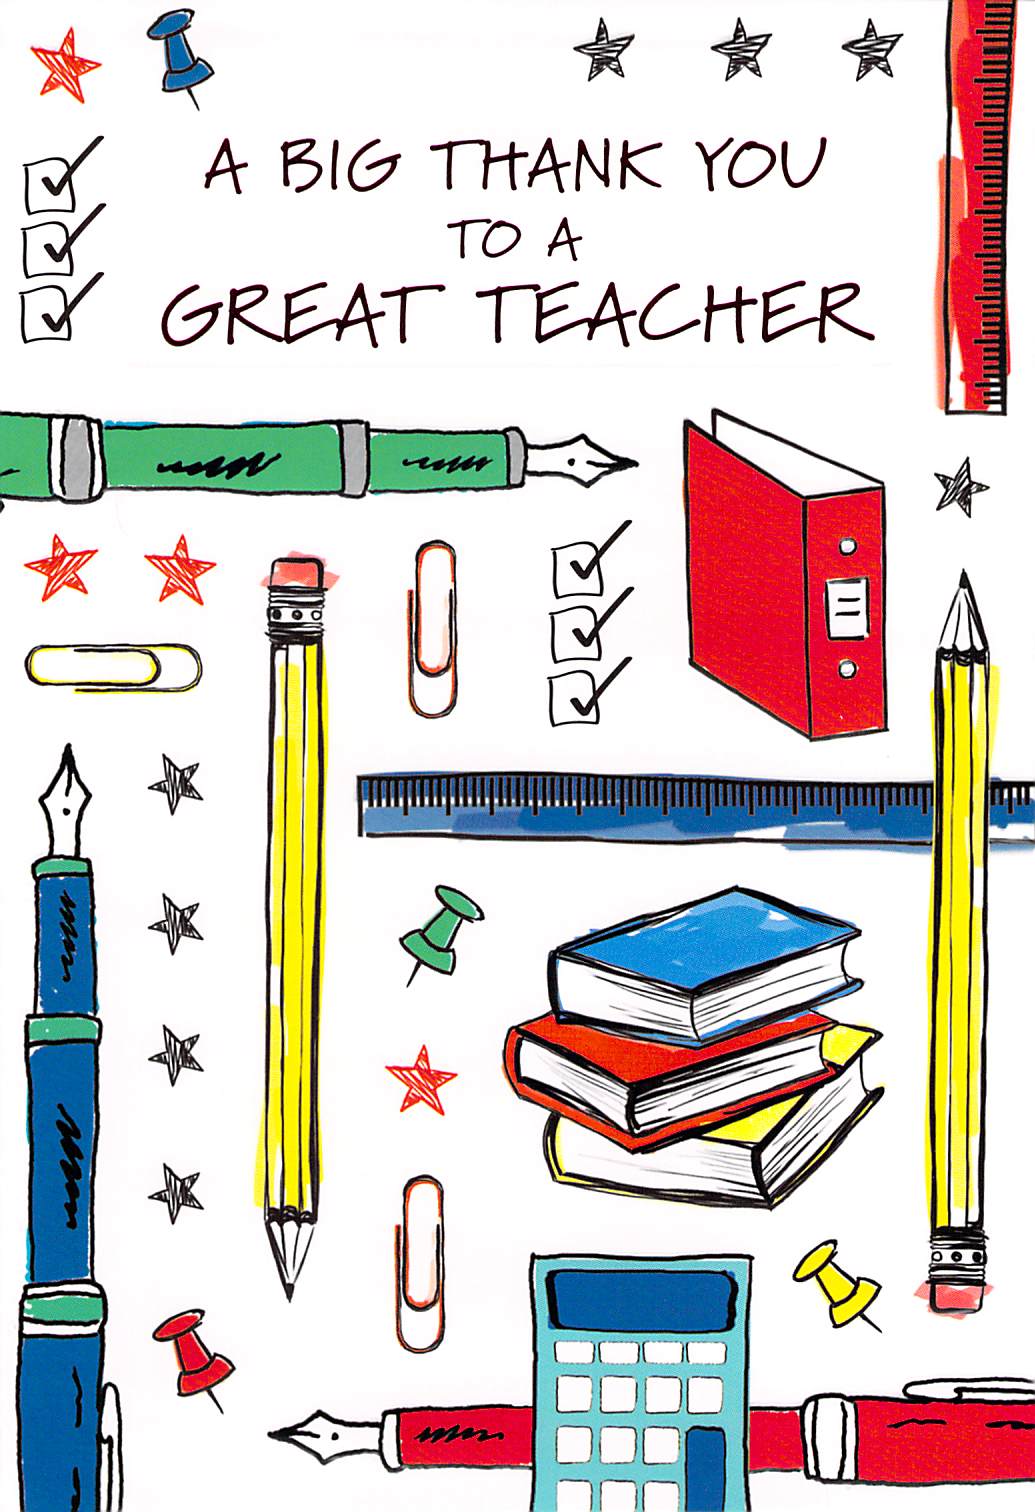 Thank You Teacher - Stationary - Greeting Card - Free Postage